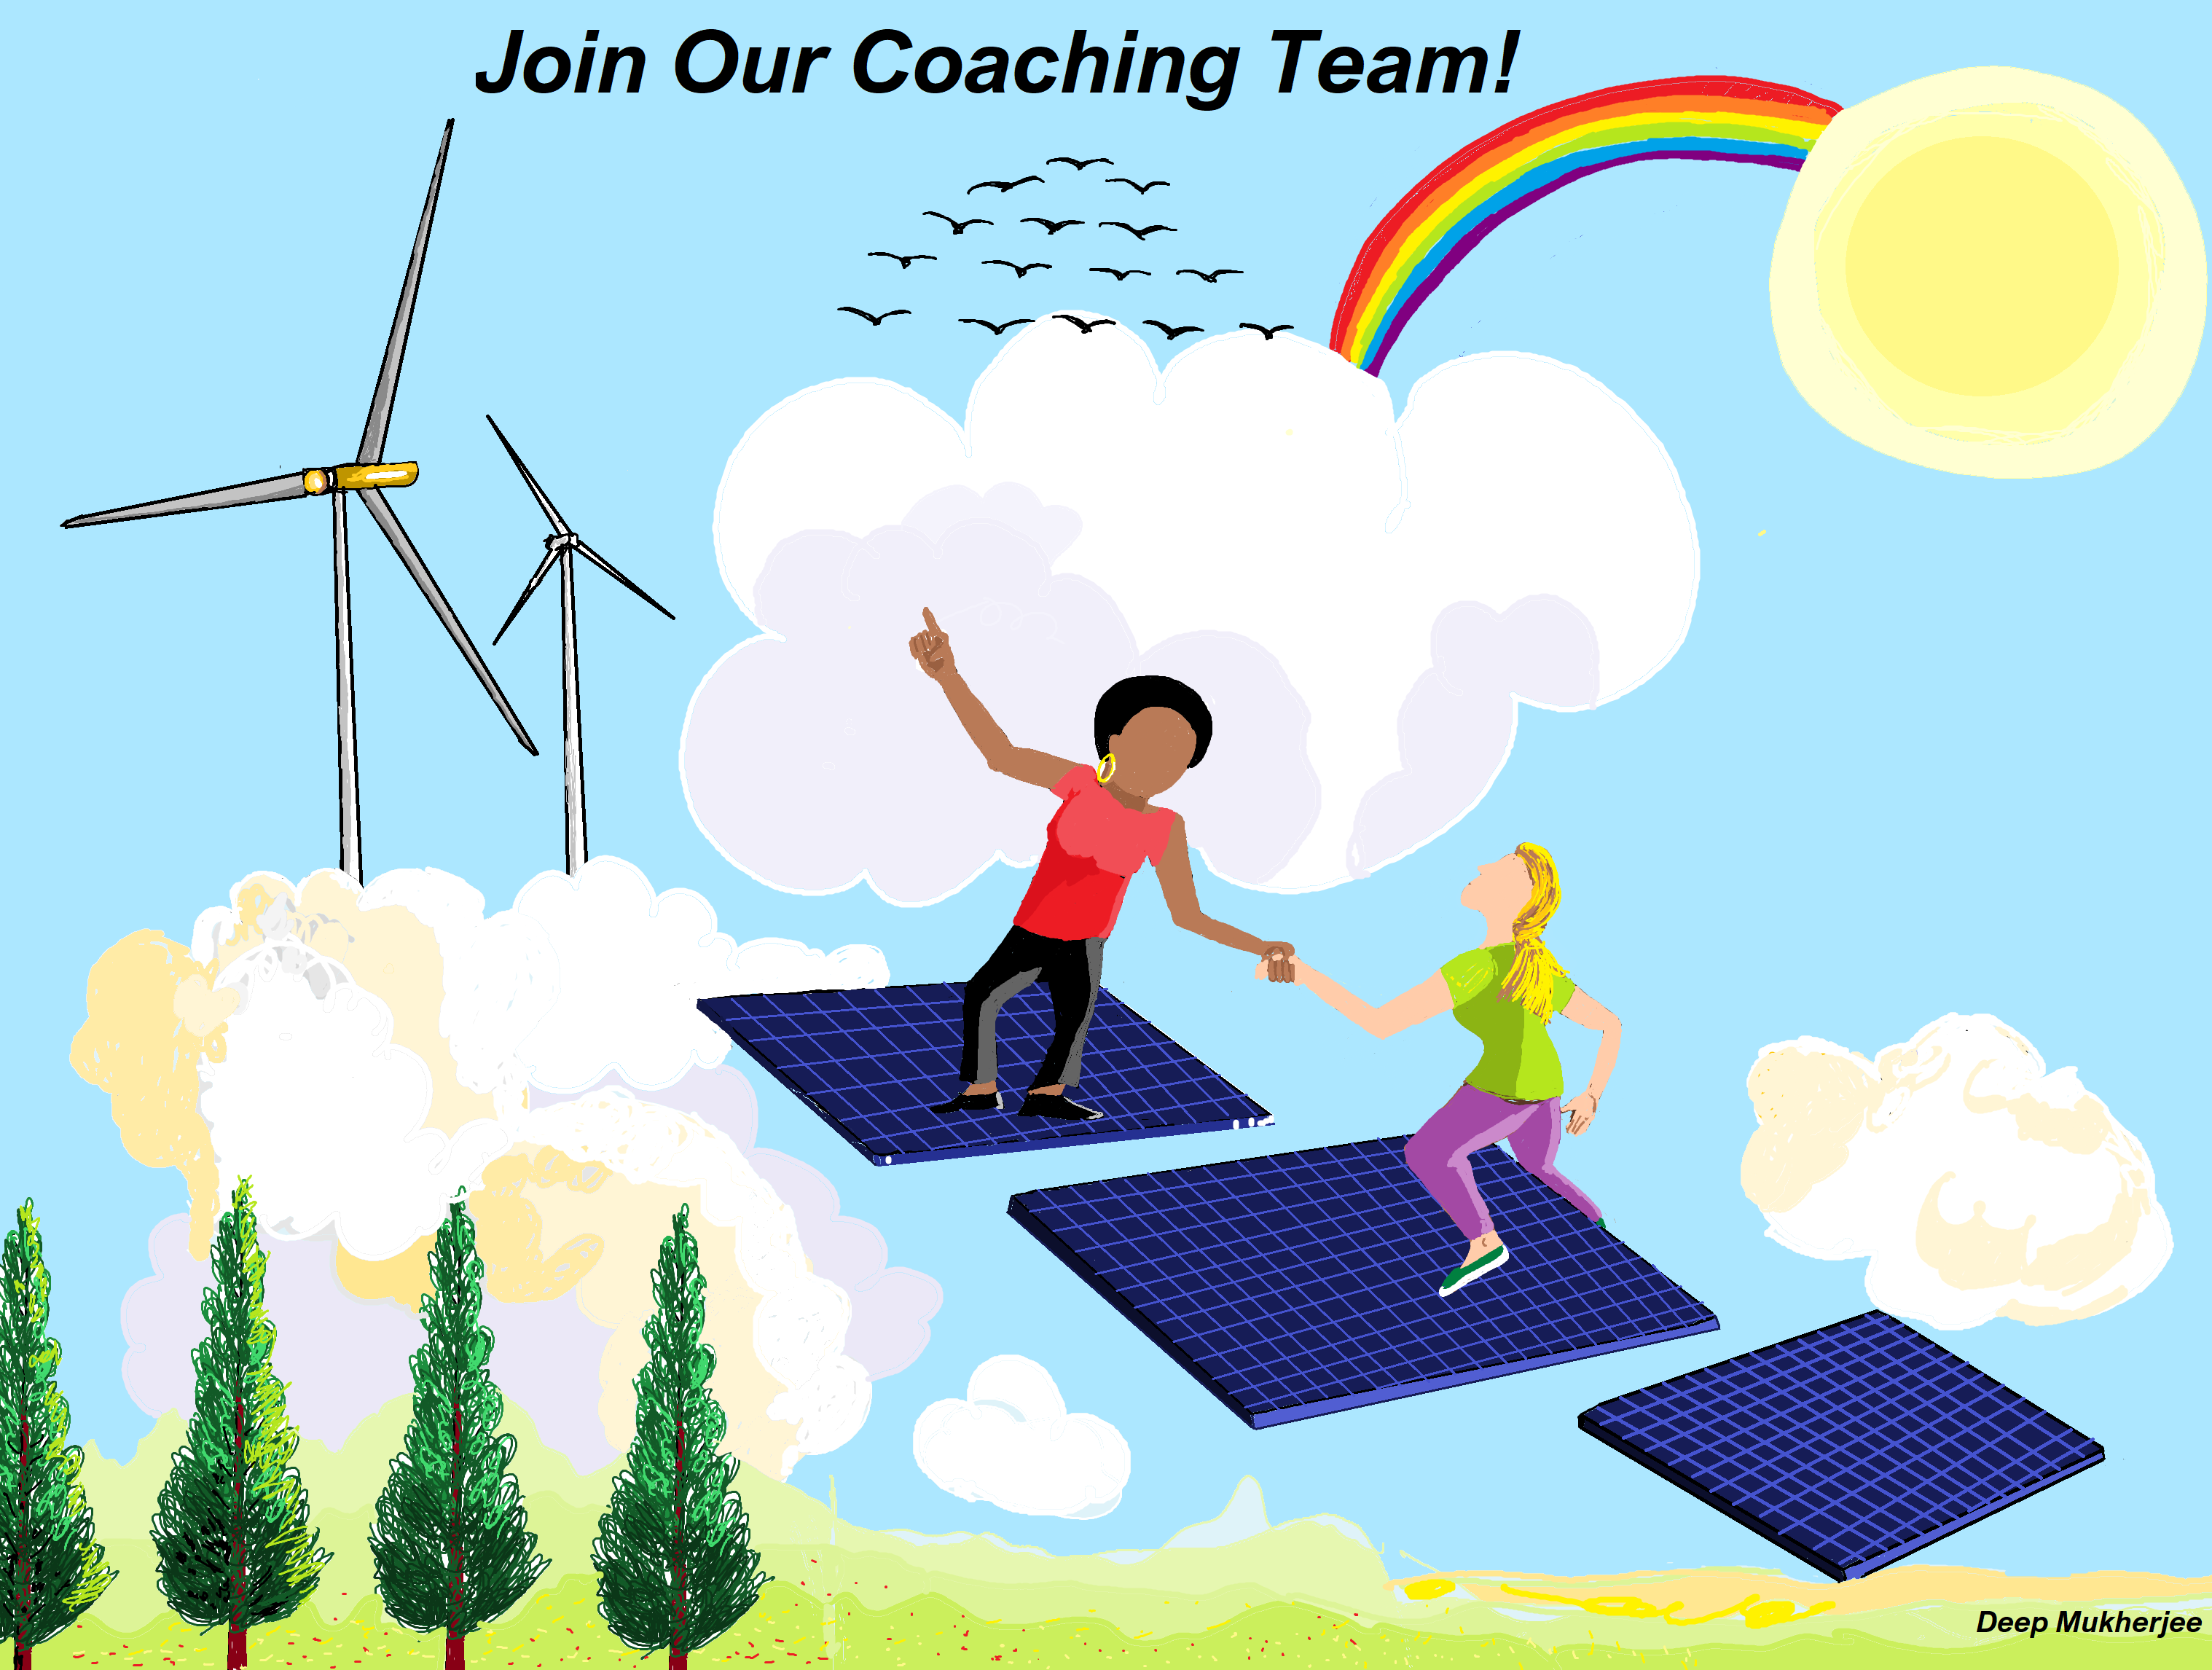 Two people ride through the sky on solar panels toward a rainbow and wind turbines. Text at the top reads, "Join Our Coaching Team!"